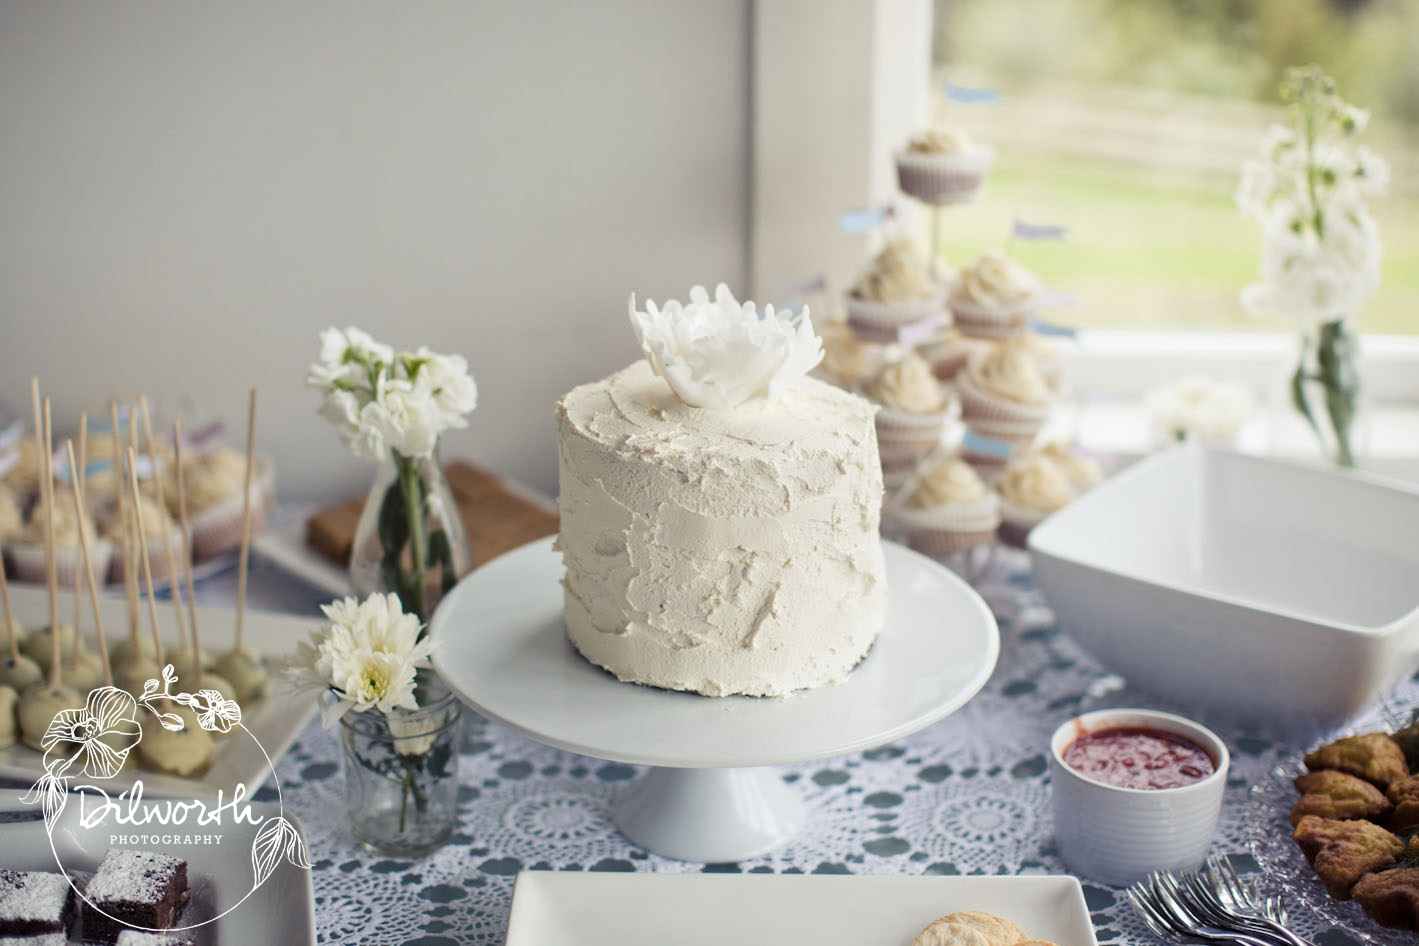 The beautiful cake was presented on our white cake stand and looked ...